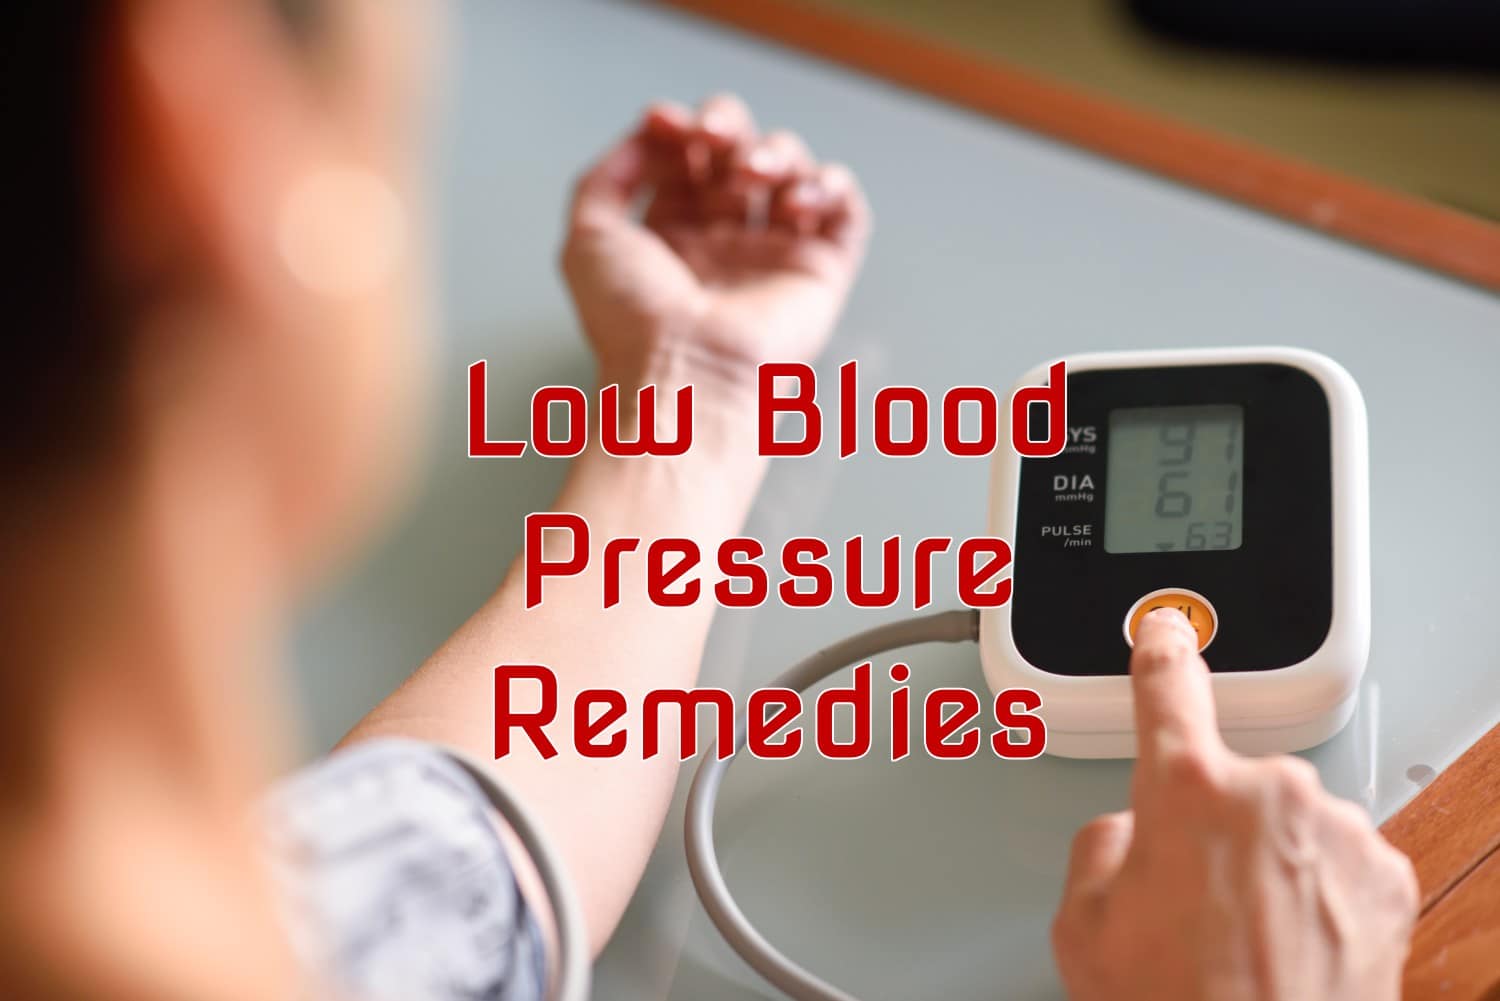 10 Home Remedies for Low Blood Pressure